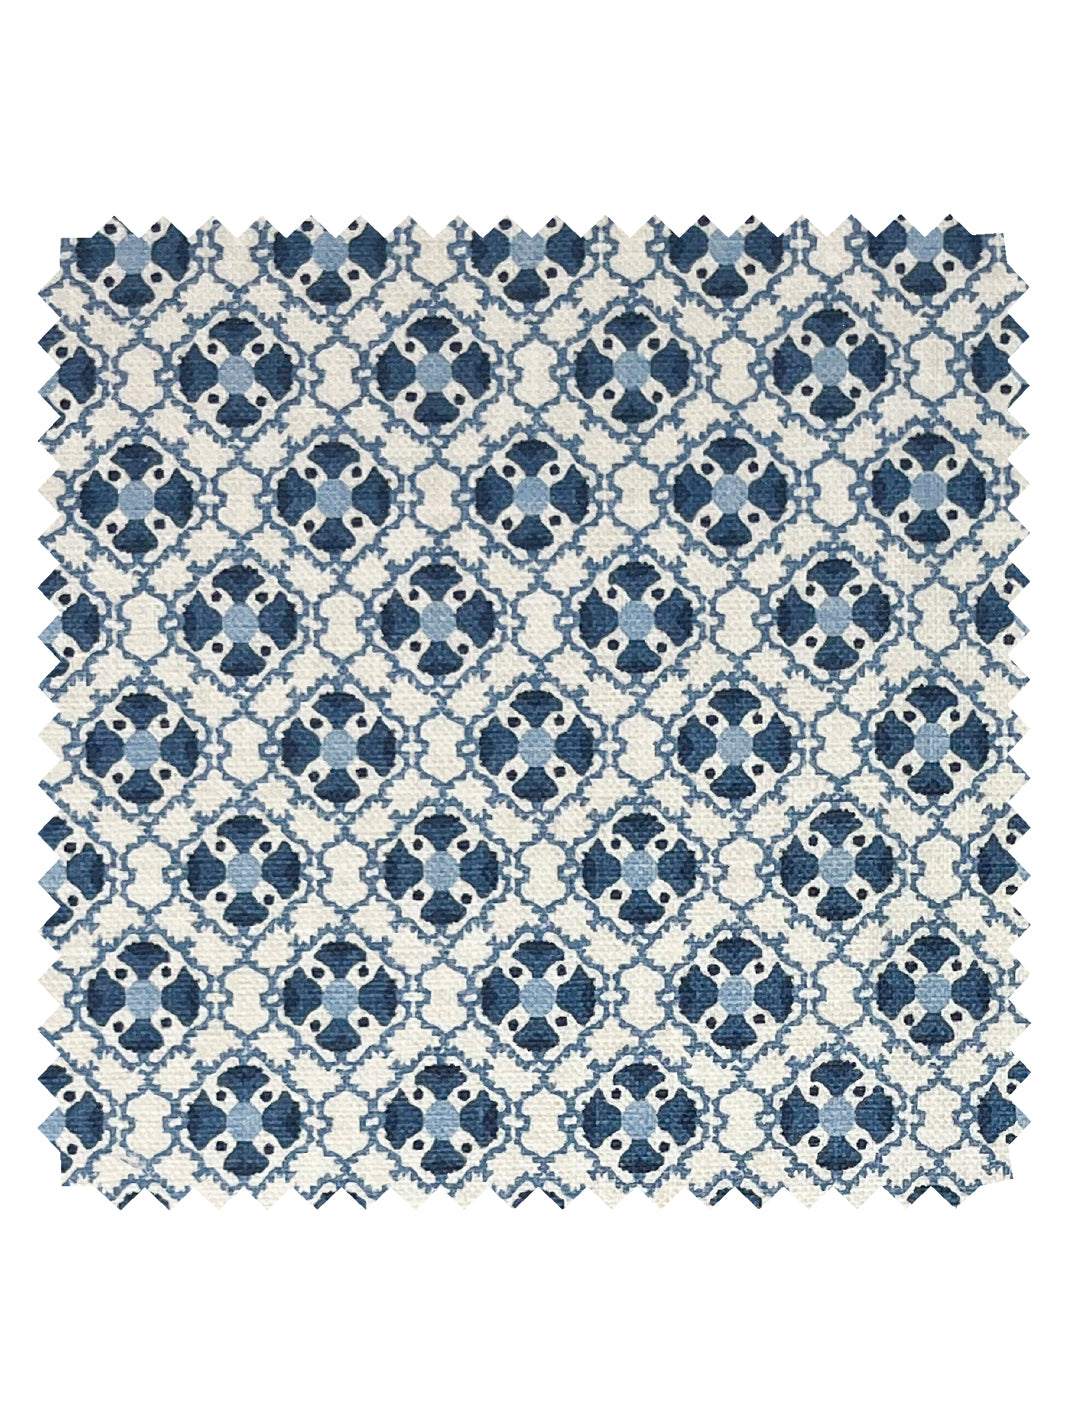 'Medallion All Over' Linen Fabric by Nathan Turner - Darker Blue